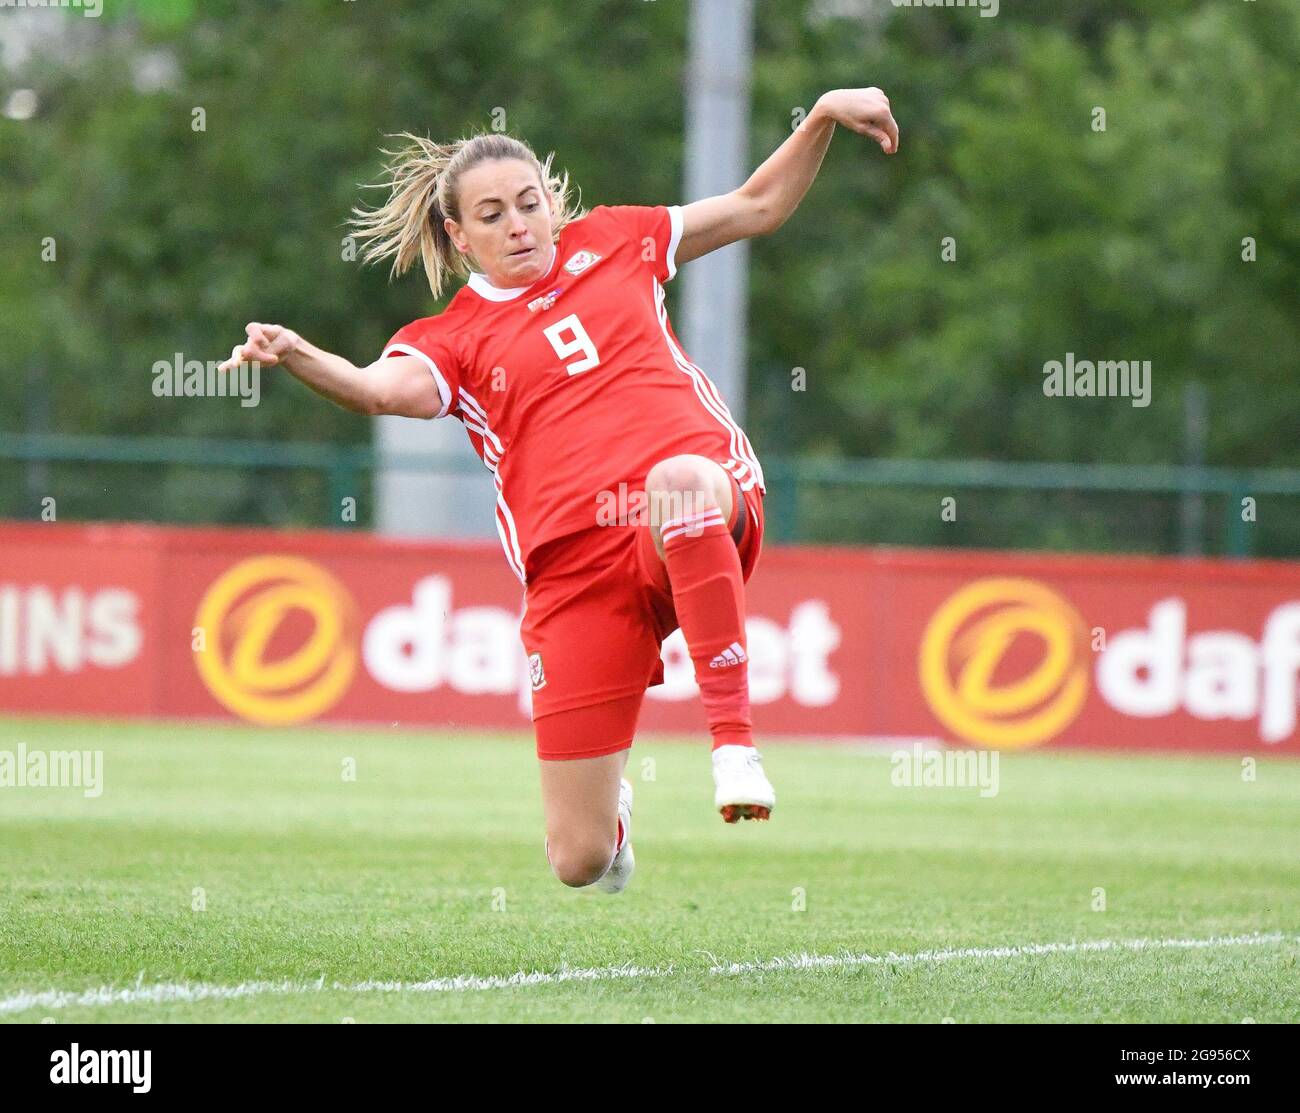 Cardiff, Wales. 4 June, 2019. Kayleigh Green of Wales Women in action during the Women's International Friendly match between Wales Women and New Zealand Women at Cardiff International Sports Campus, Cardiff, Wales on 4 June, 2019. Credit: Duncan Thomas/Majestic Media. Stock Photo